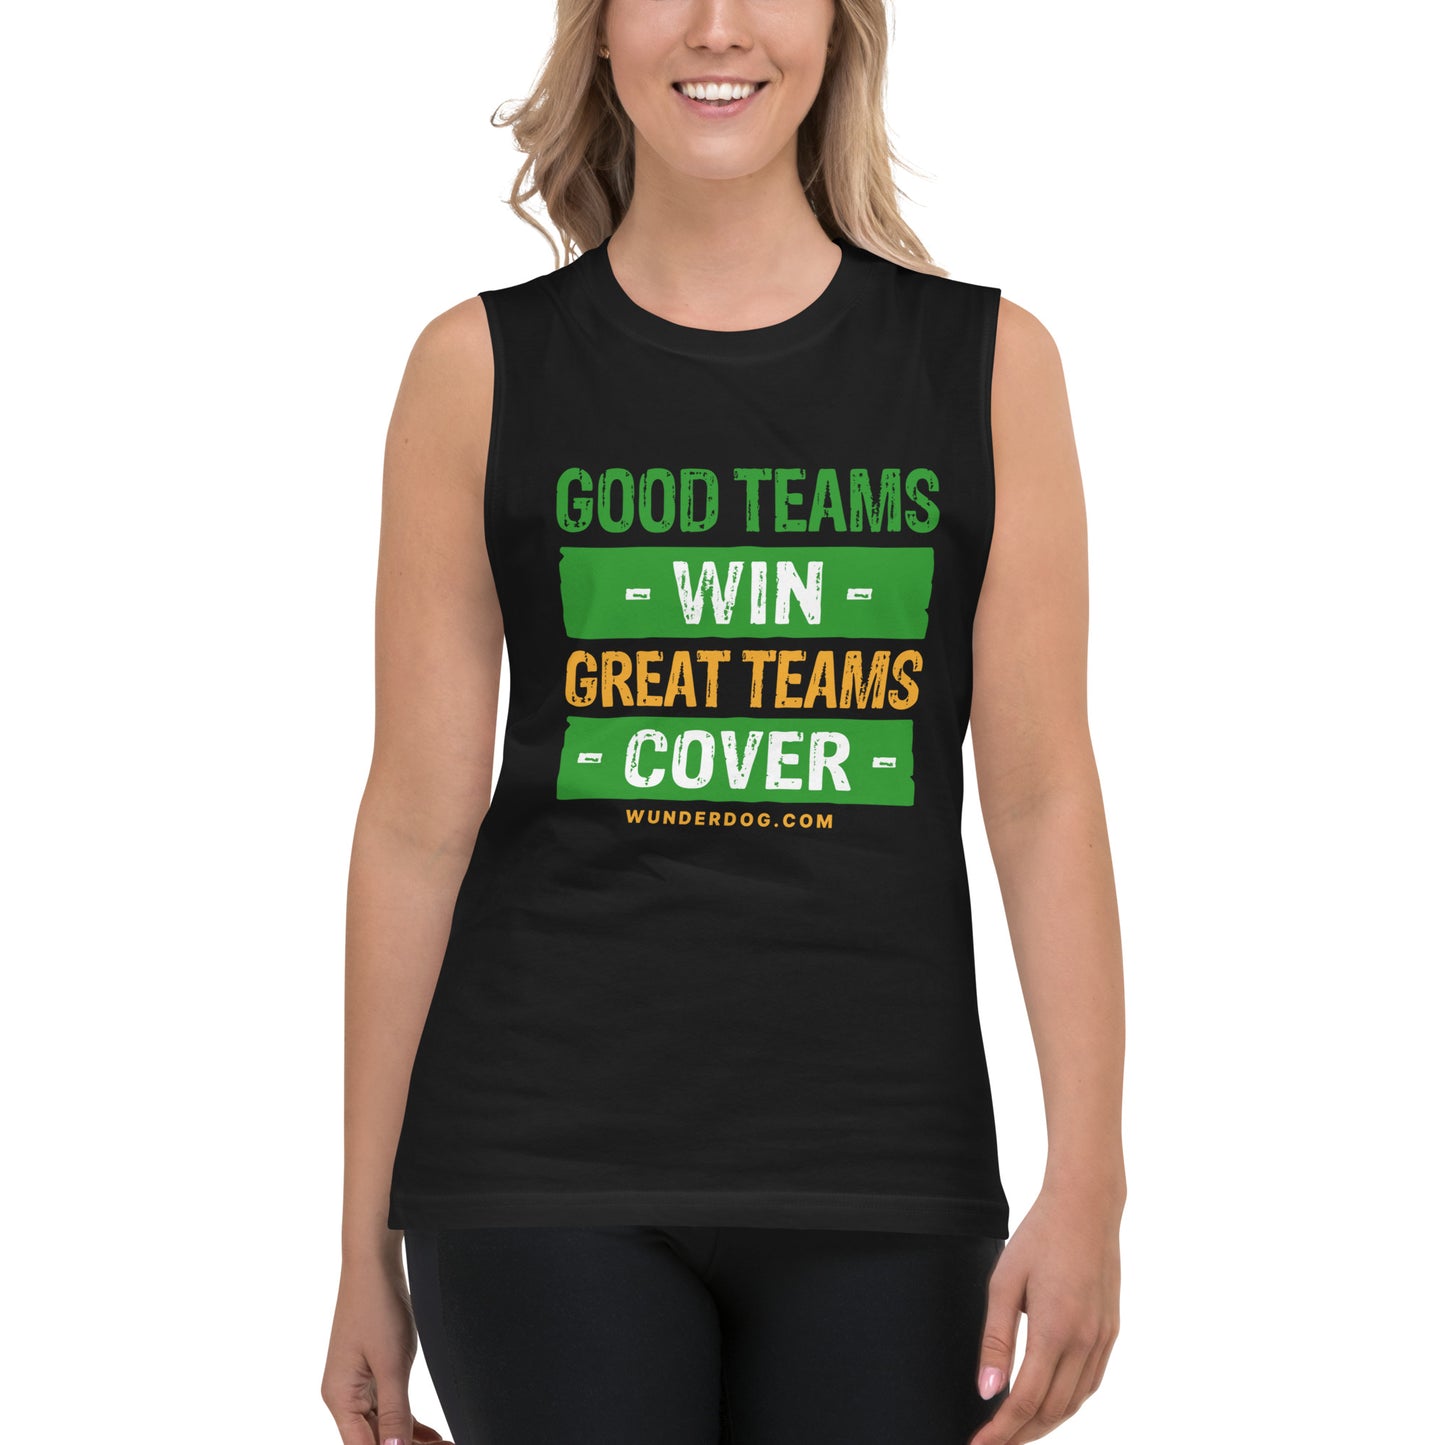 Great Teams Cover Unisex Muscle Shirt